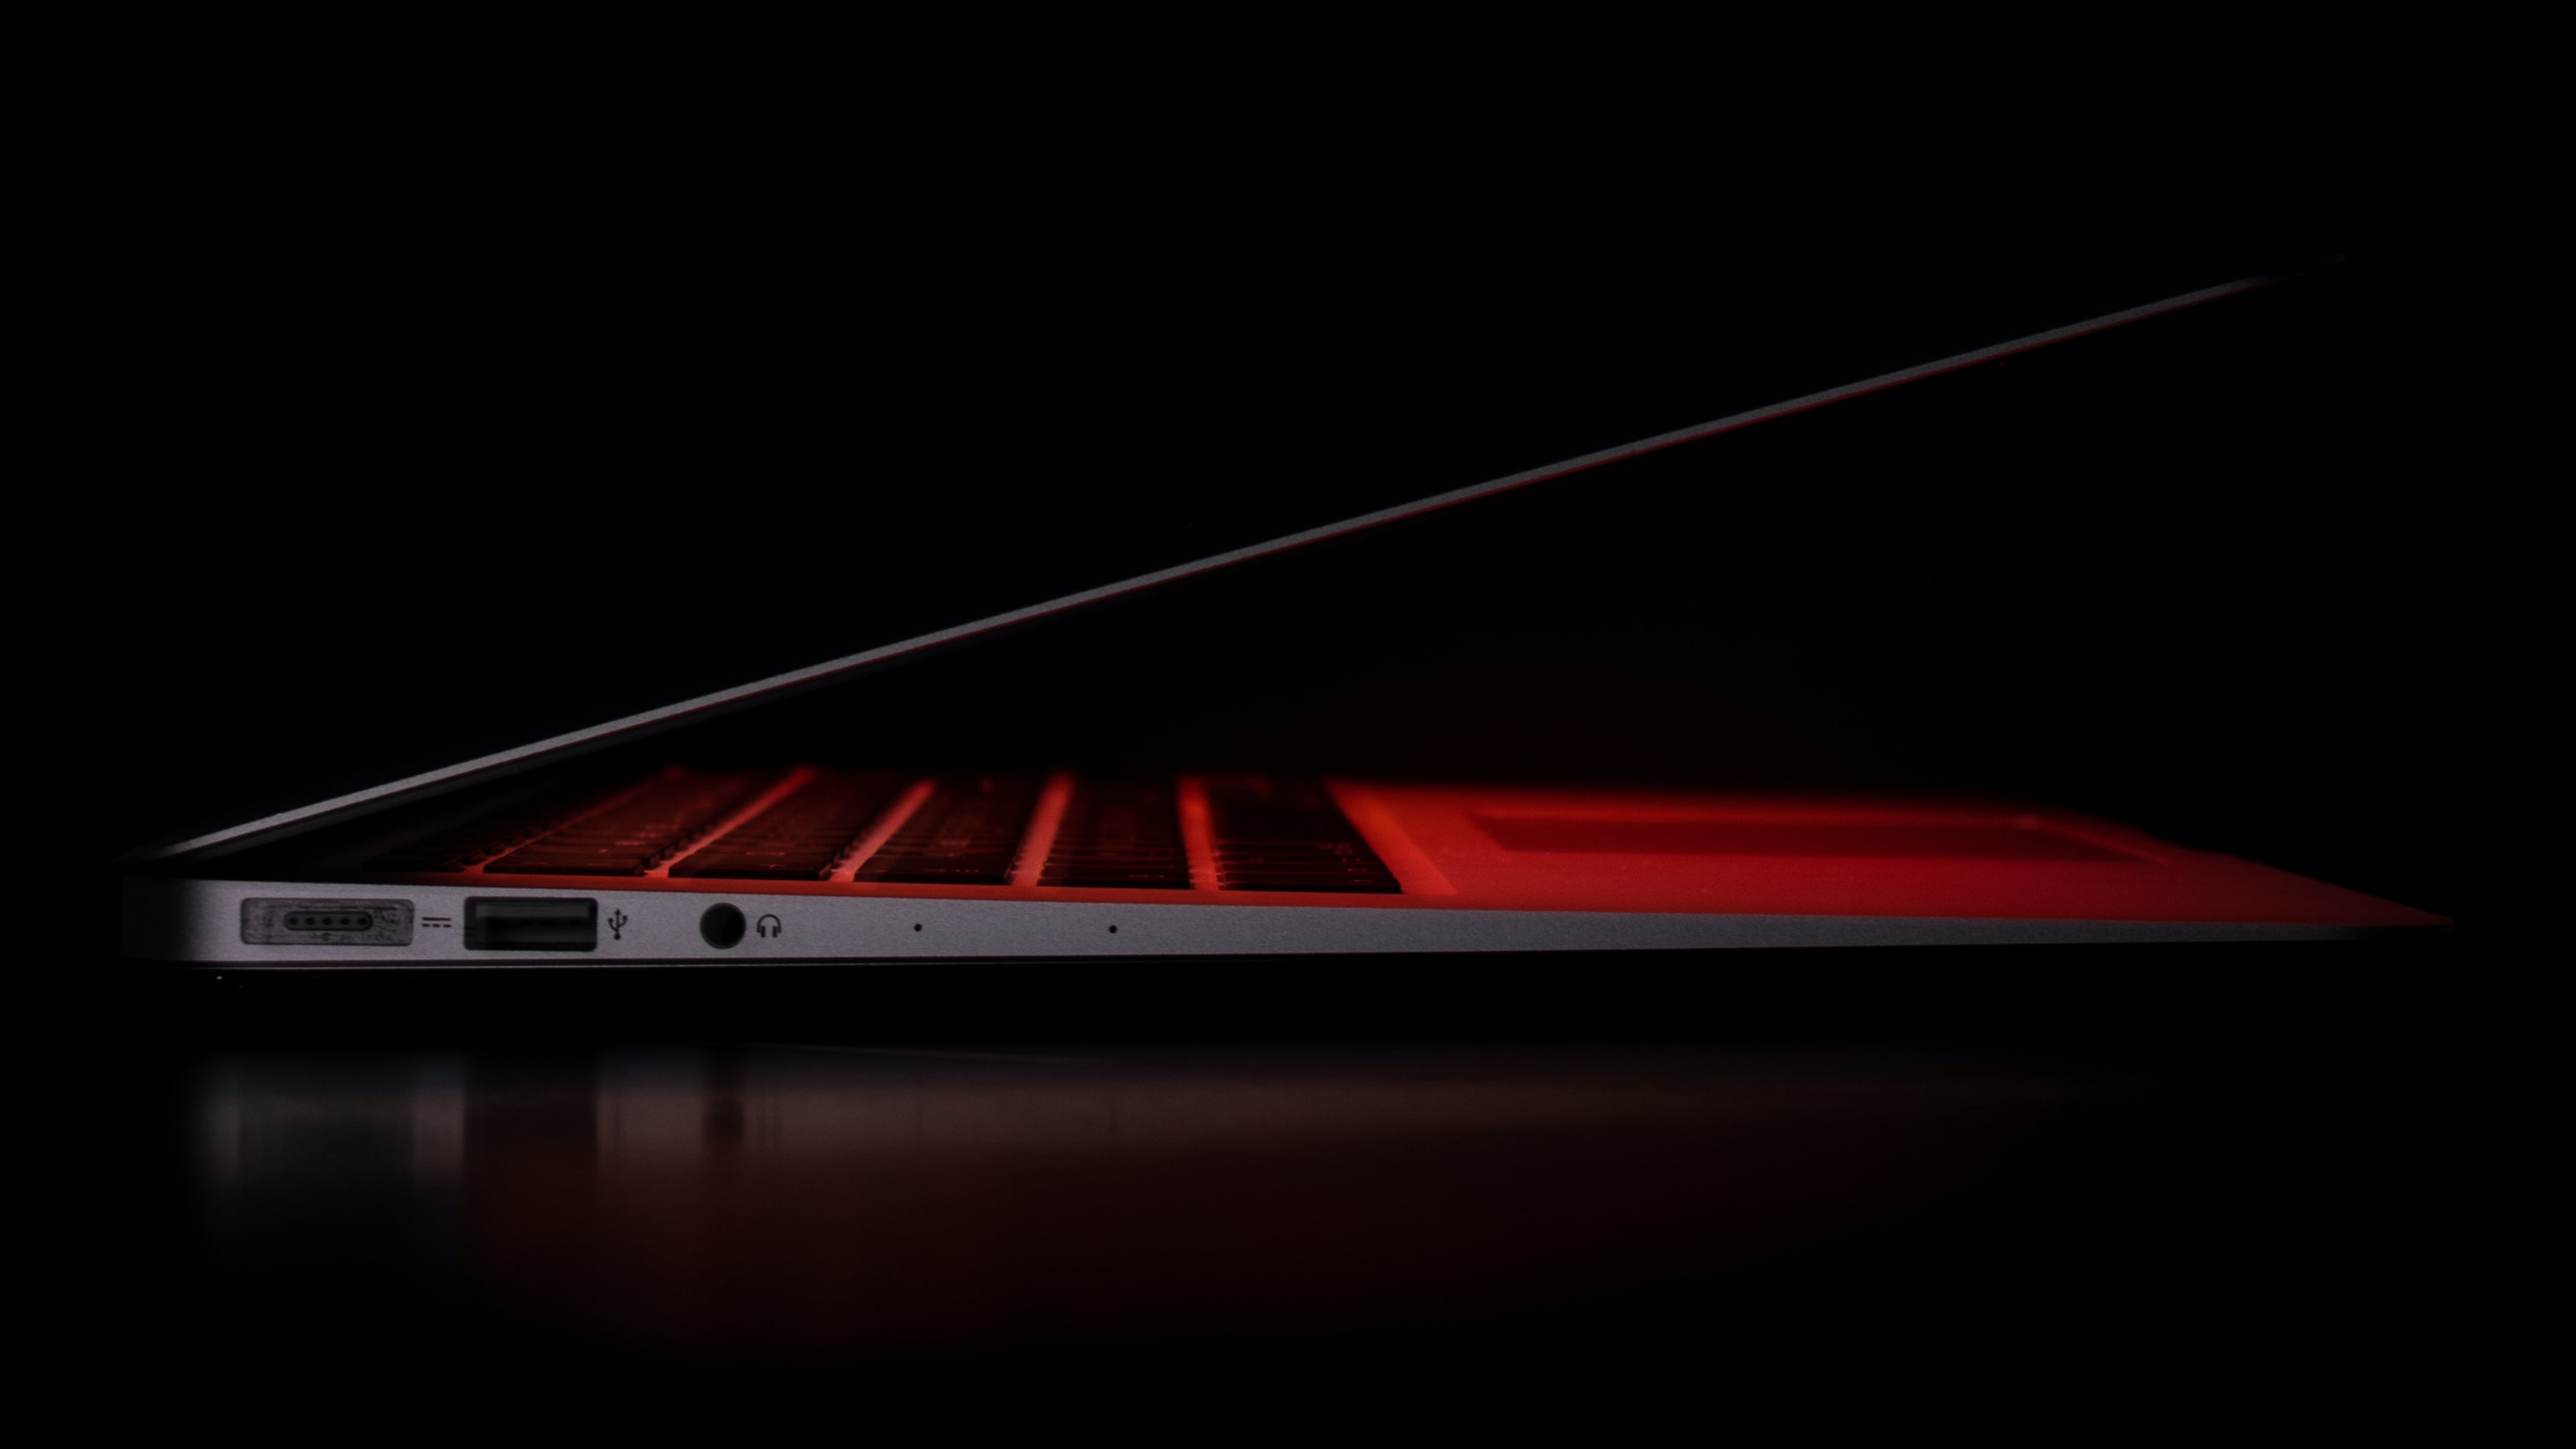 The left side view of Apple's MacBook Air laptop, shot at night